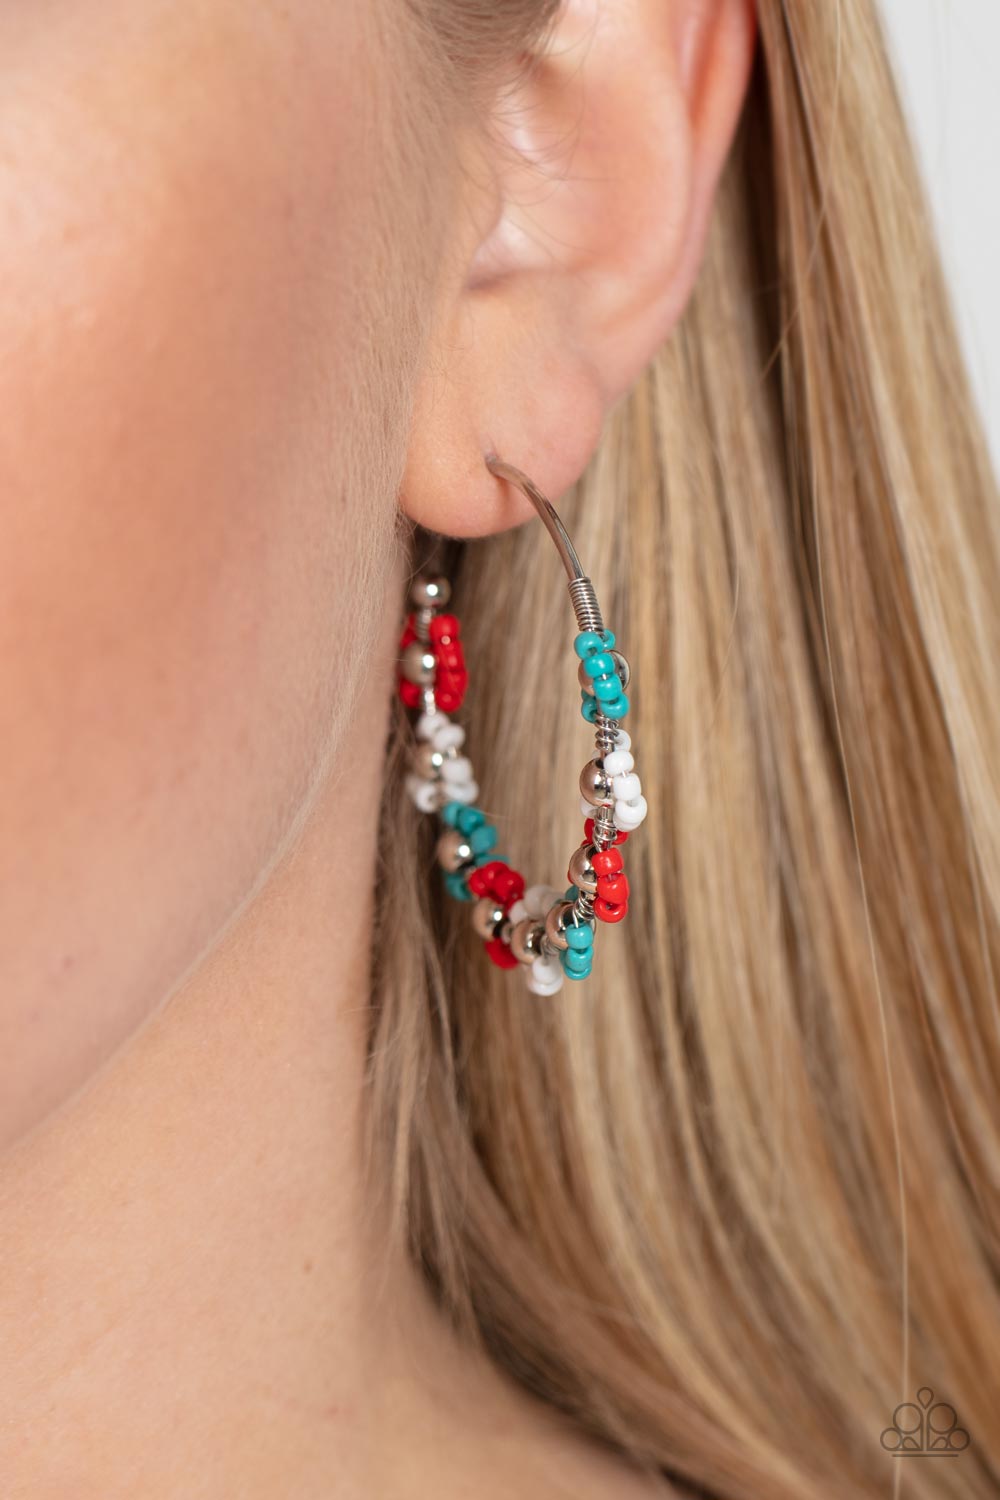 Growth Spurt Red Flower Earring - Paparazzi Accessories  Adorned with shiny silver beaded centers, a dainty collection of white, turquoise, and red Branch seed beaded rings create earthy flower accents along a classic silver hoop for a grounding floral display. Earring attaches to a standard post fitting. Hoop measures approximately 1 1/2" in diameter.  Sold as one pair of hoop earrings.